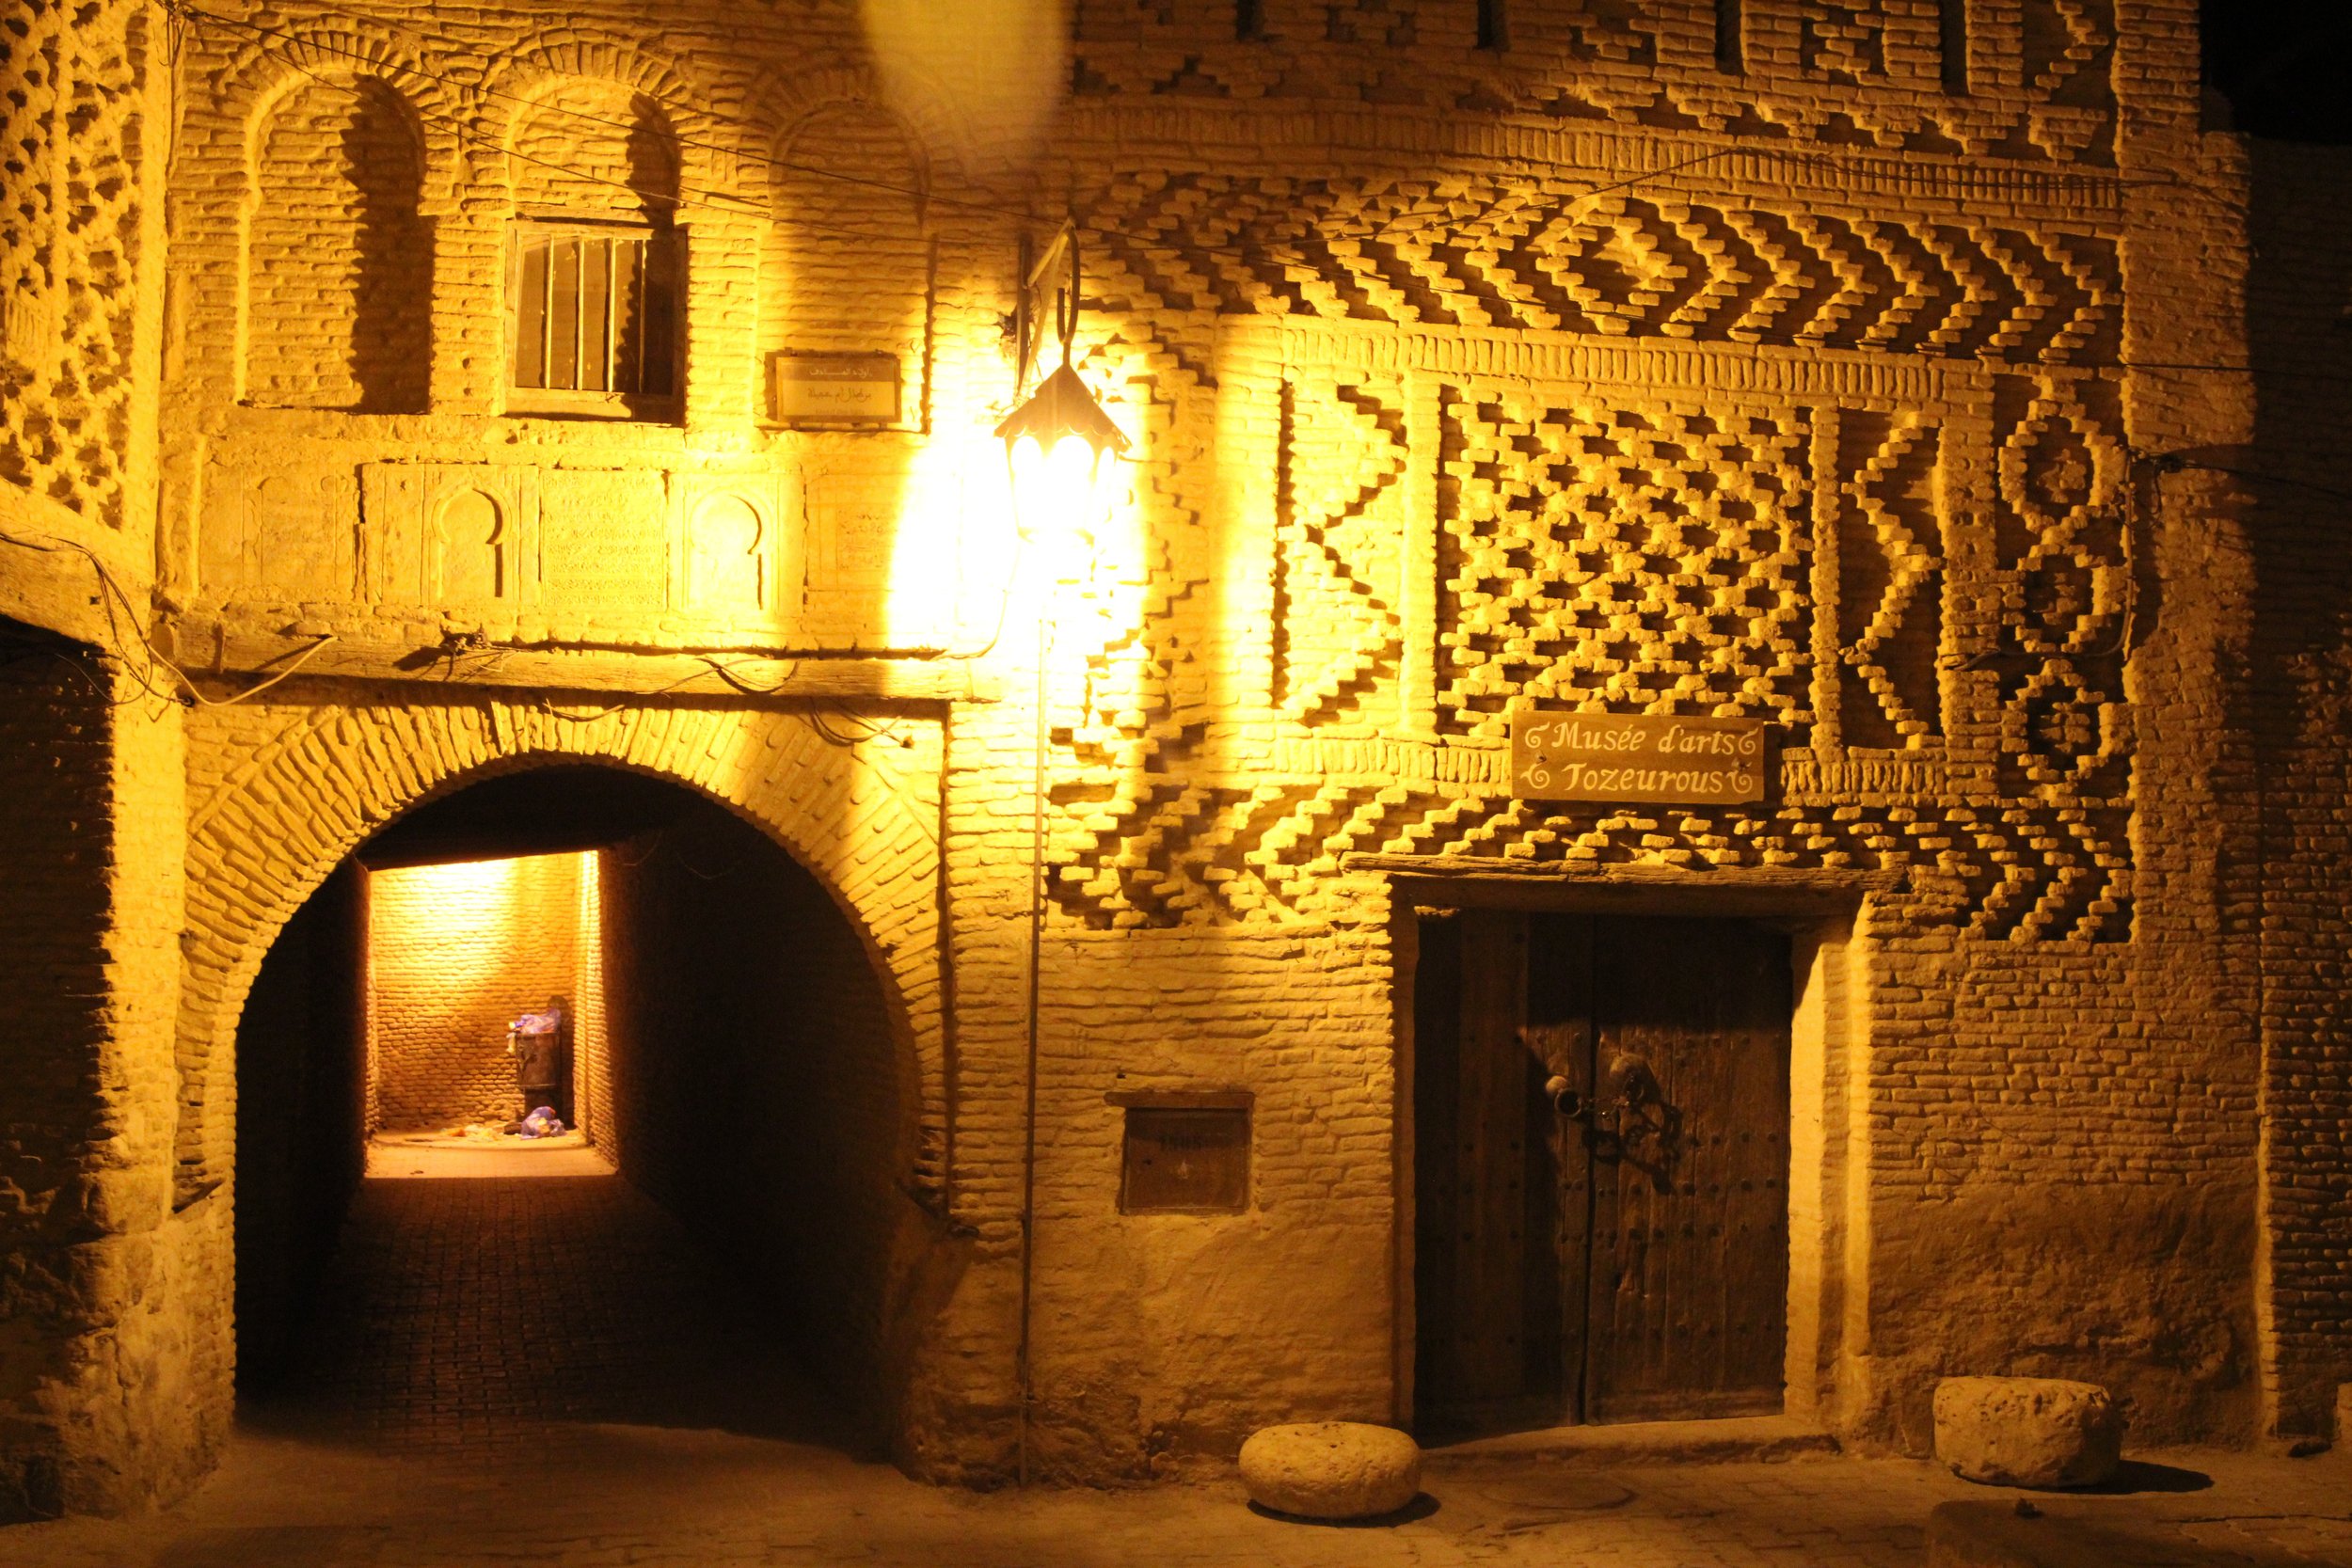  PICTURED: Medina of Tozuer, Nighttime. PC: Andrew Corbley © 